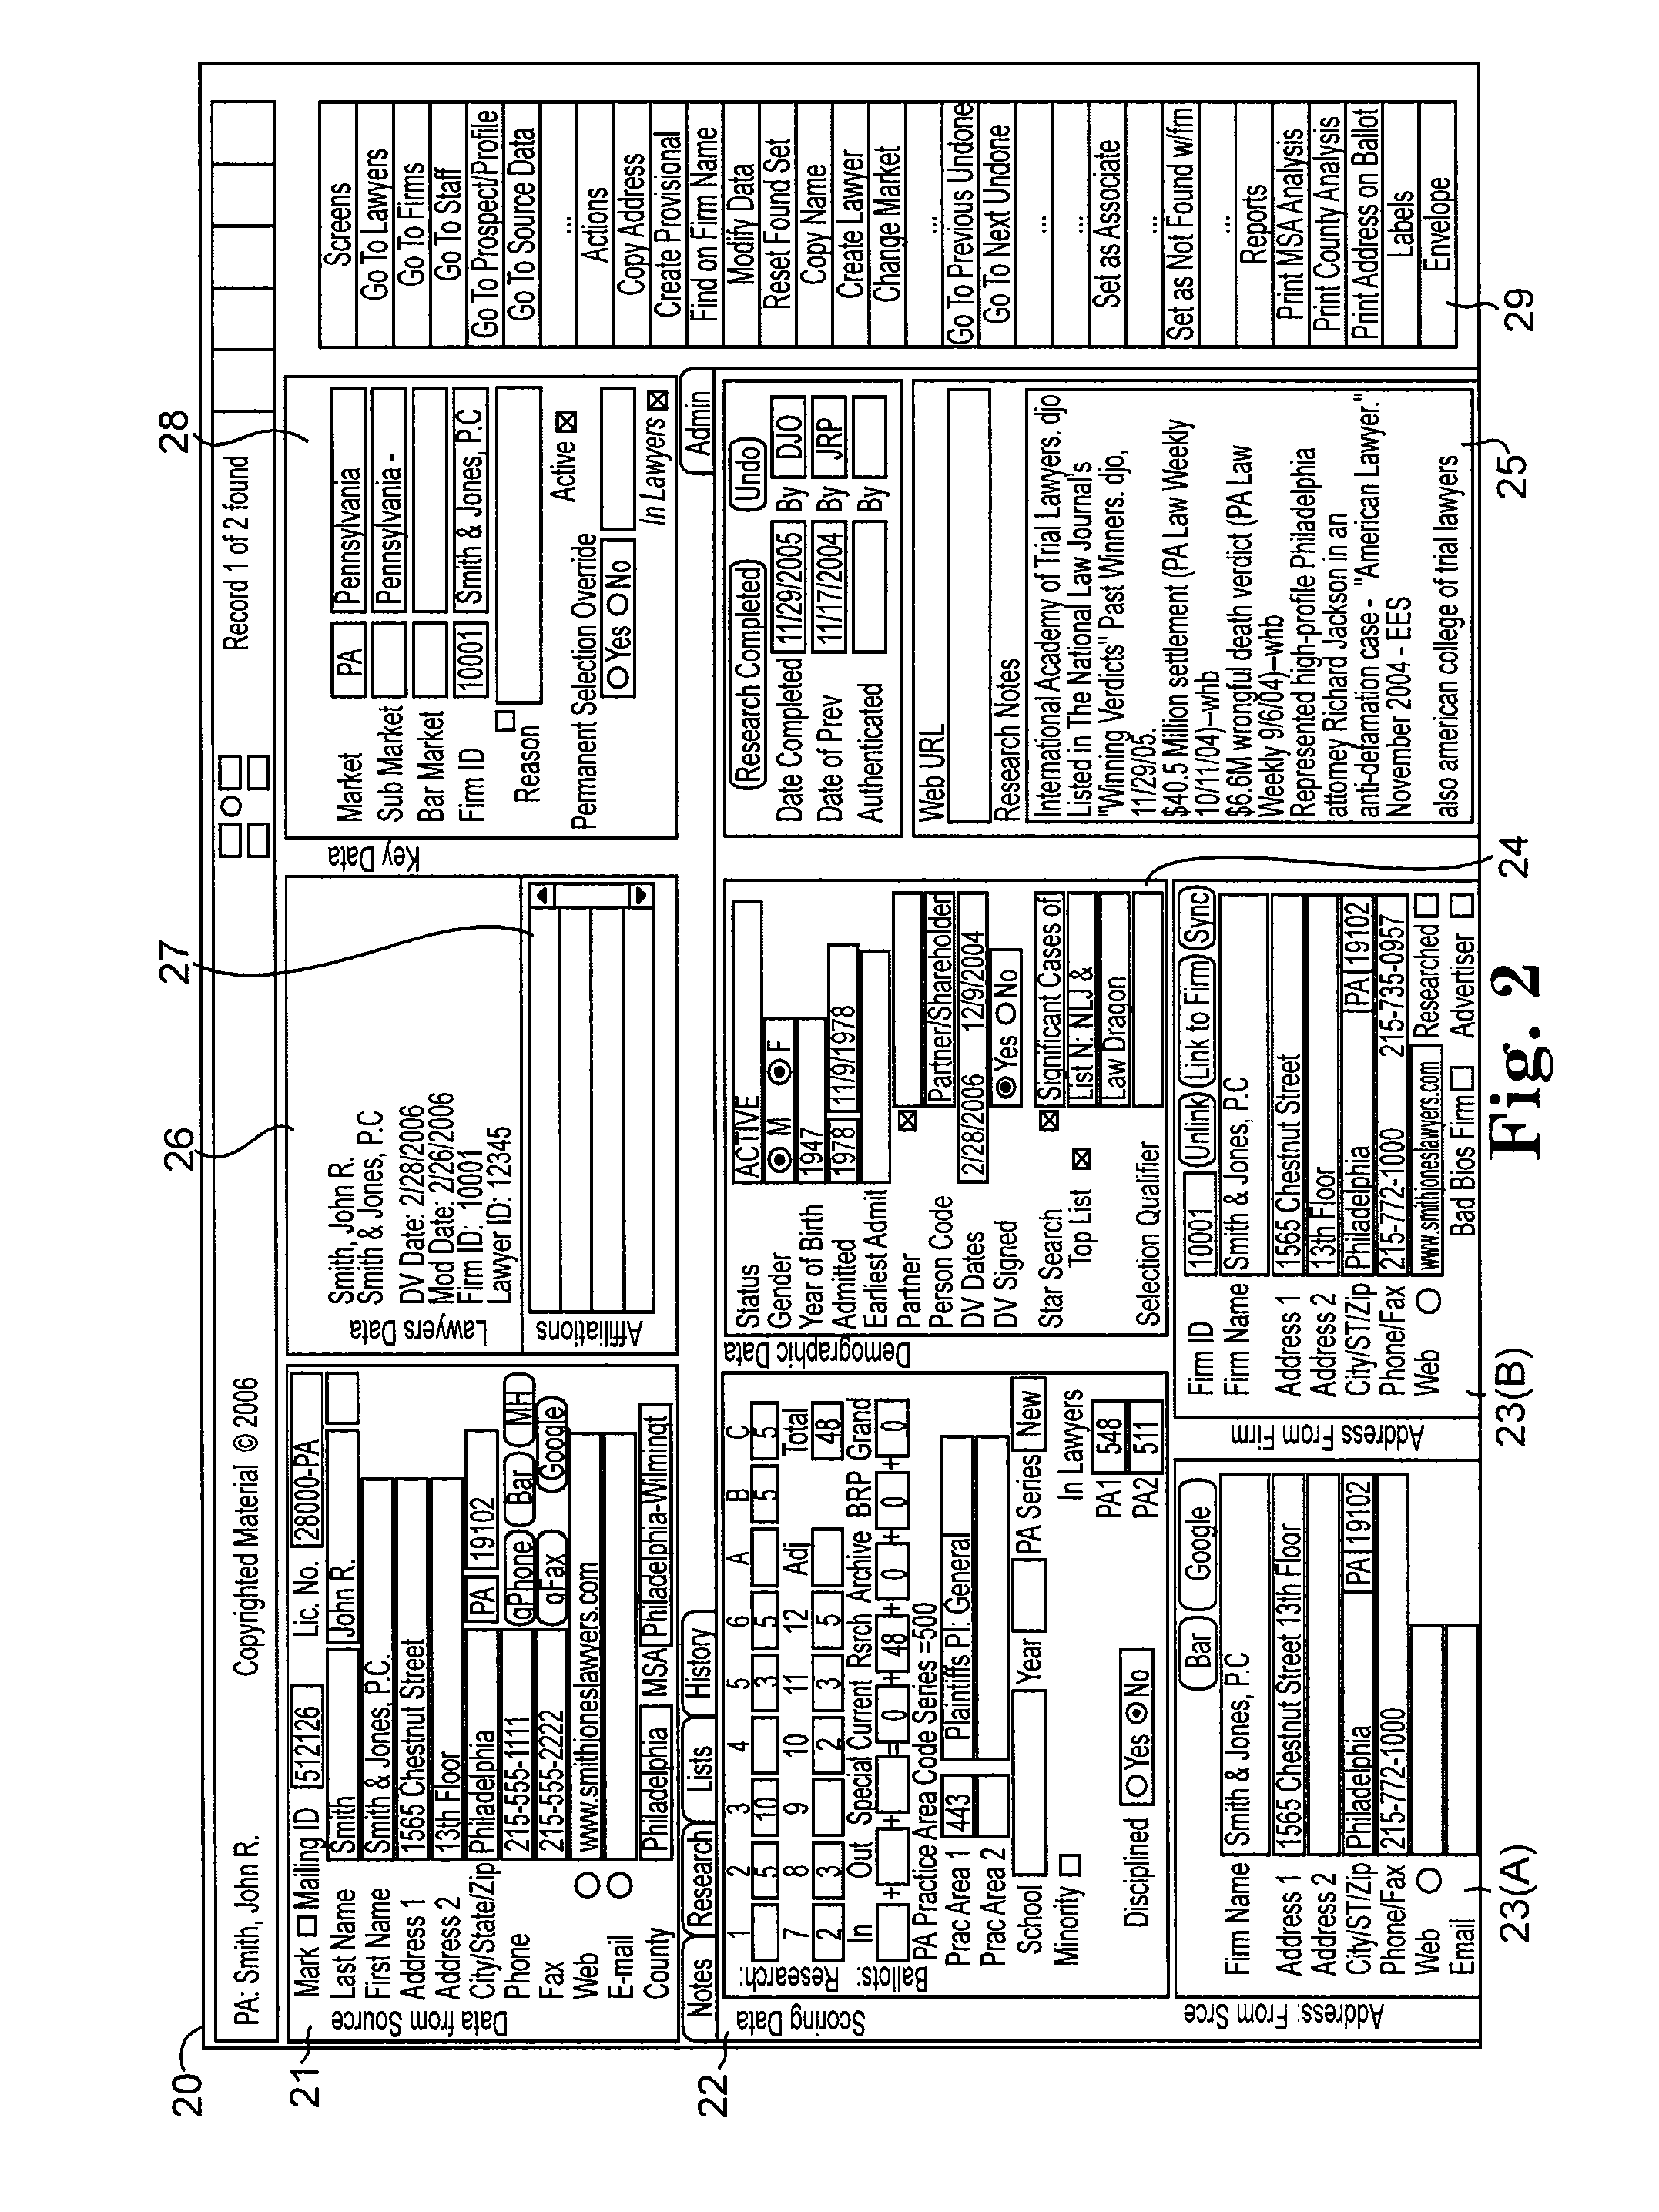 System and method for identifying excellence within a profession